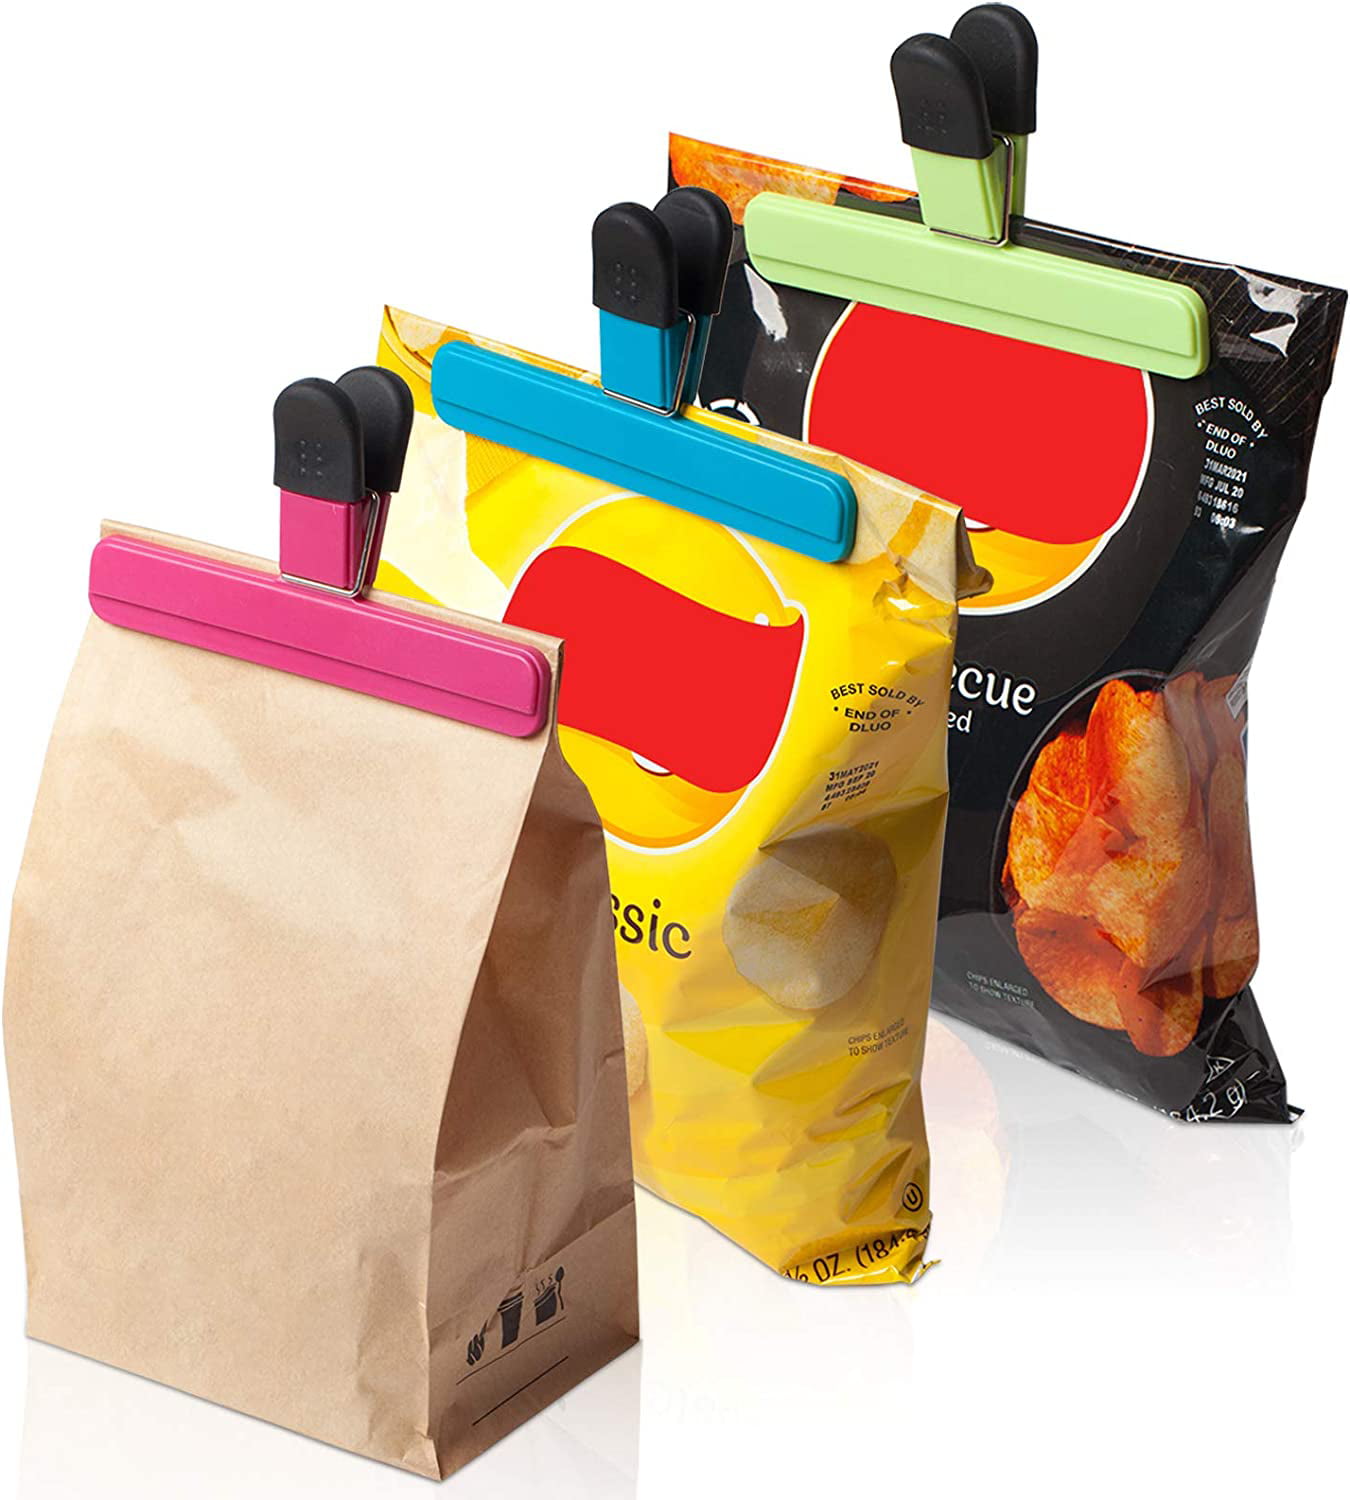 Save on Lami Bag Clips BPA Free - 6 ct Order Online Delivery